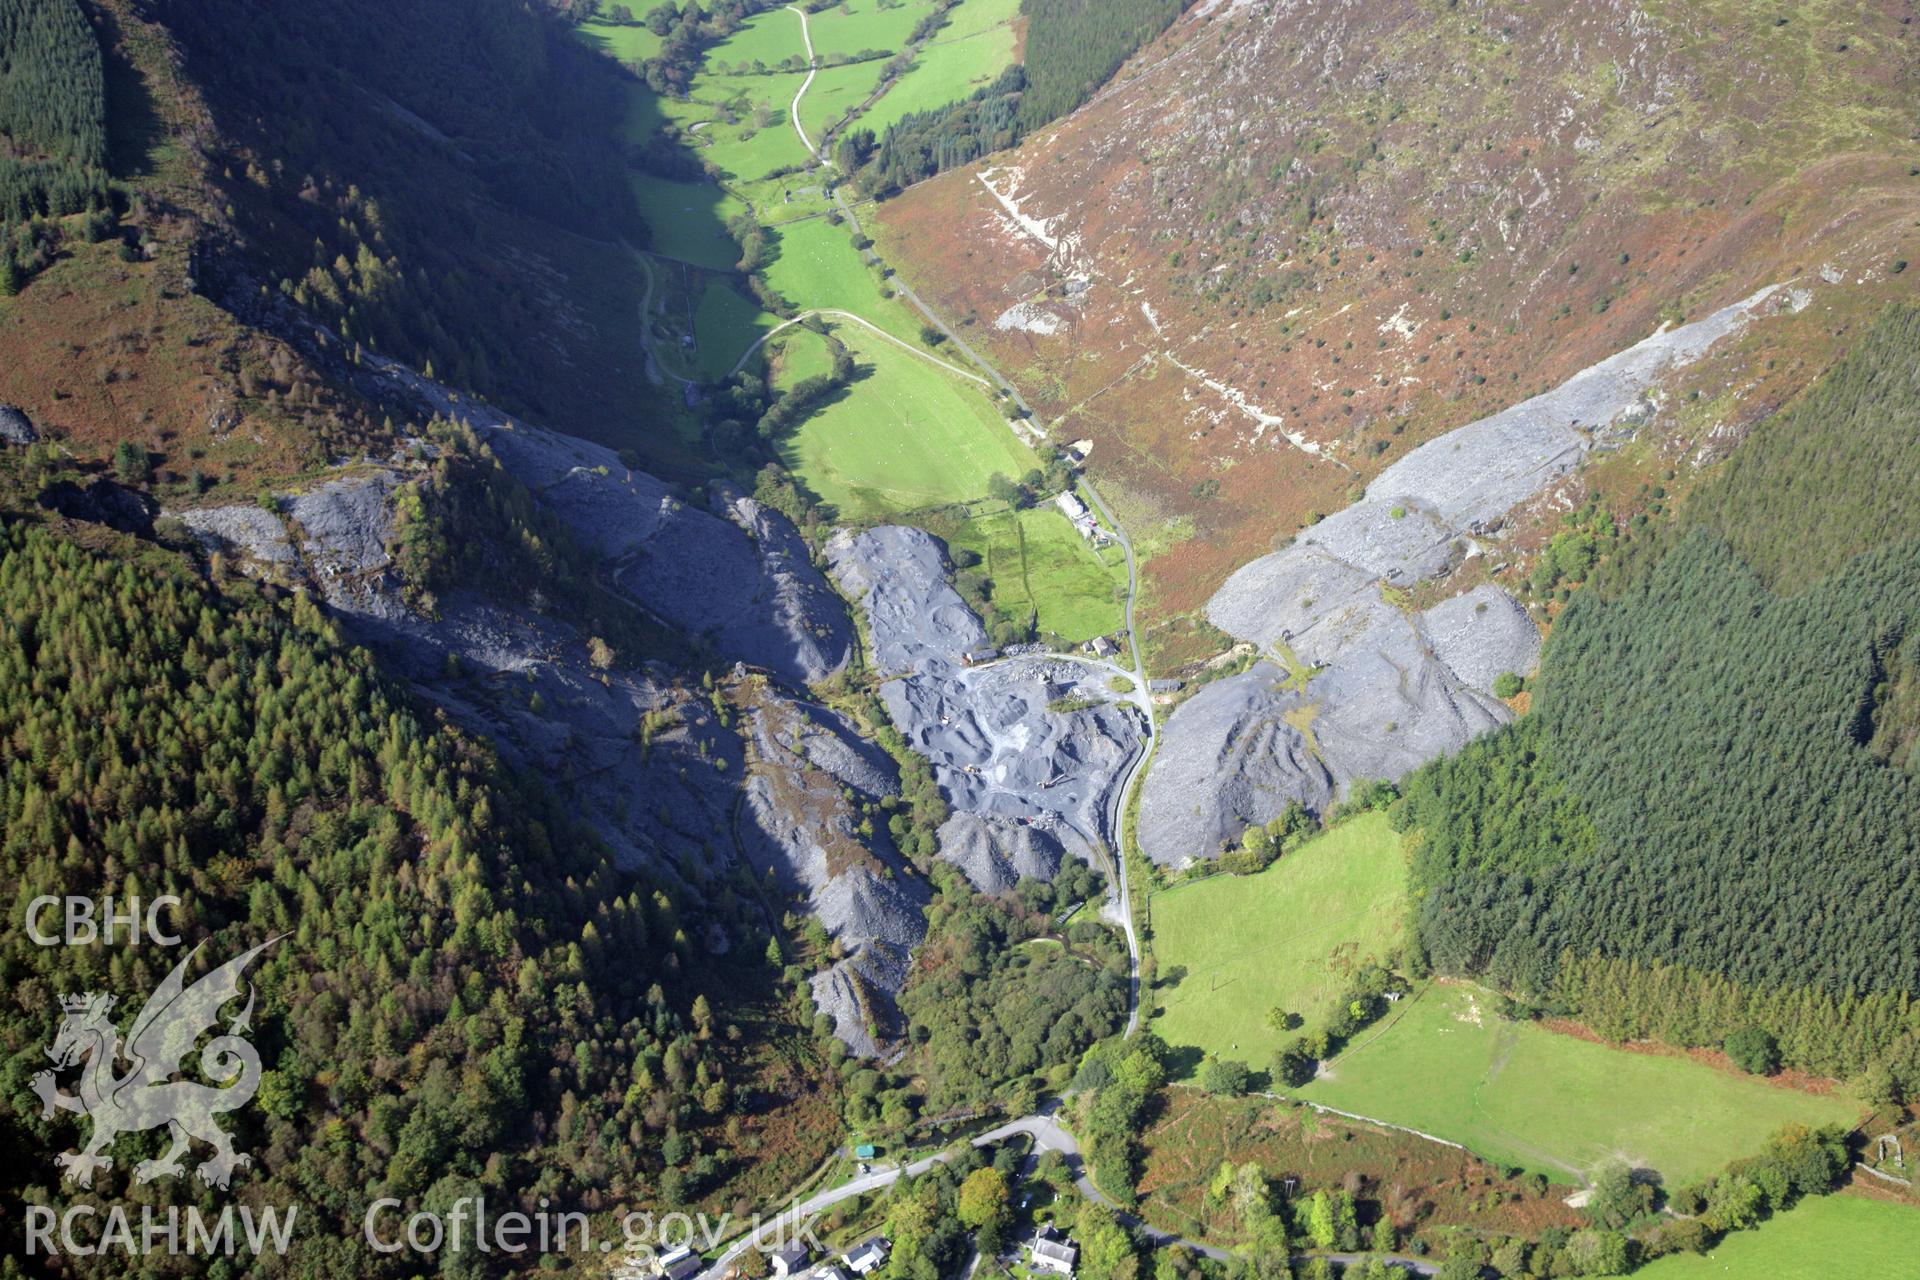 RCAHMW colour oblique photograph of Aberllefenni Slate Quarry, Water Balance Incline. Taken by Oliver Davies on 29/09/2011.